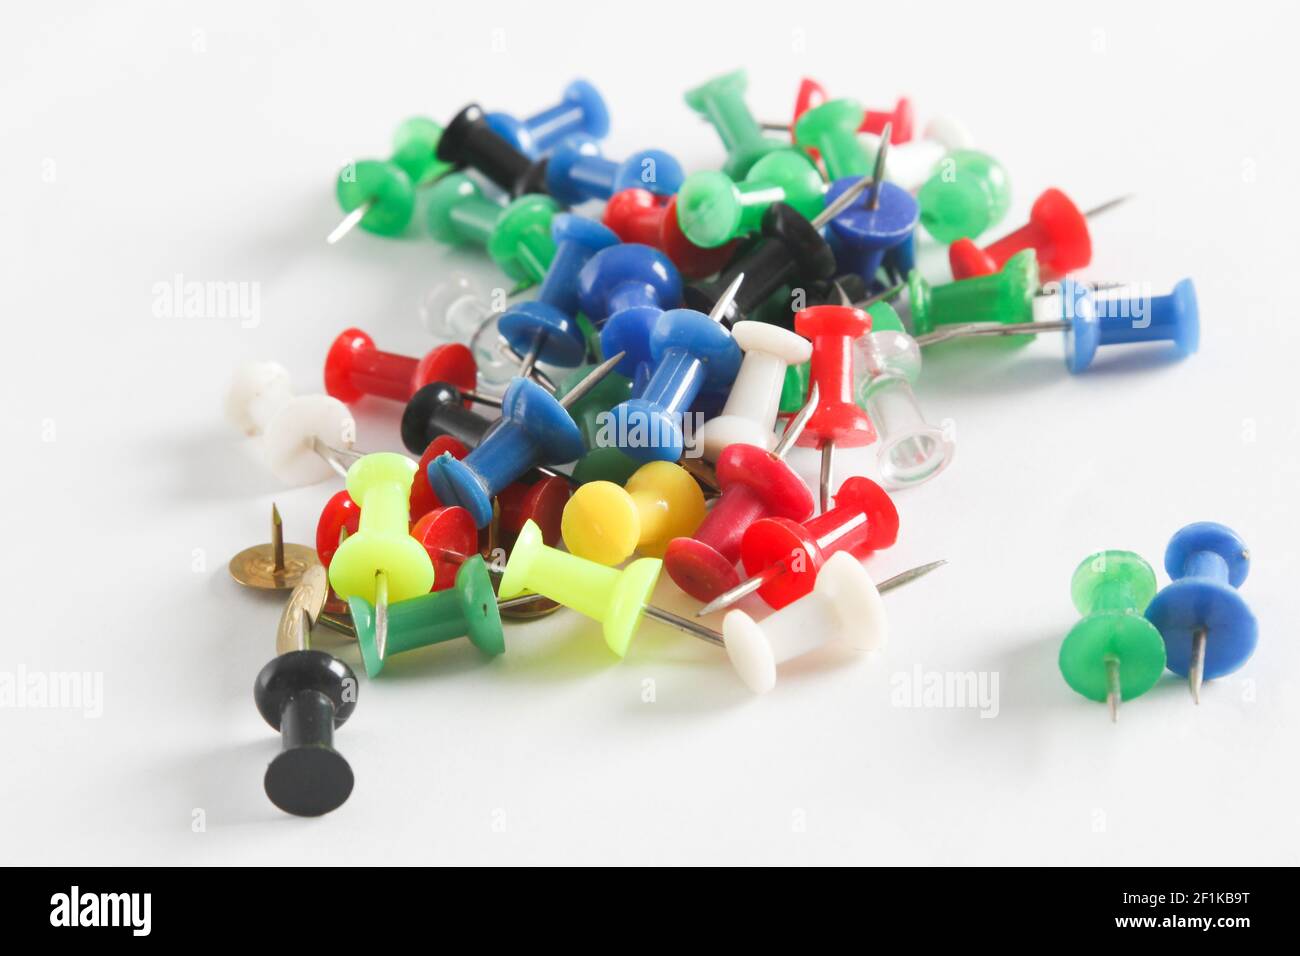 Colorful thumb tack on the white background Stock Photo